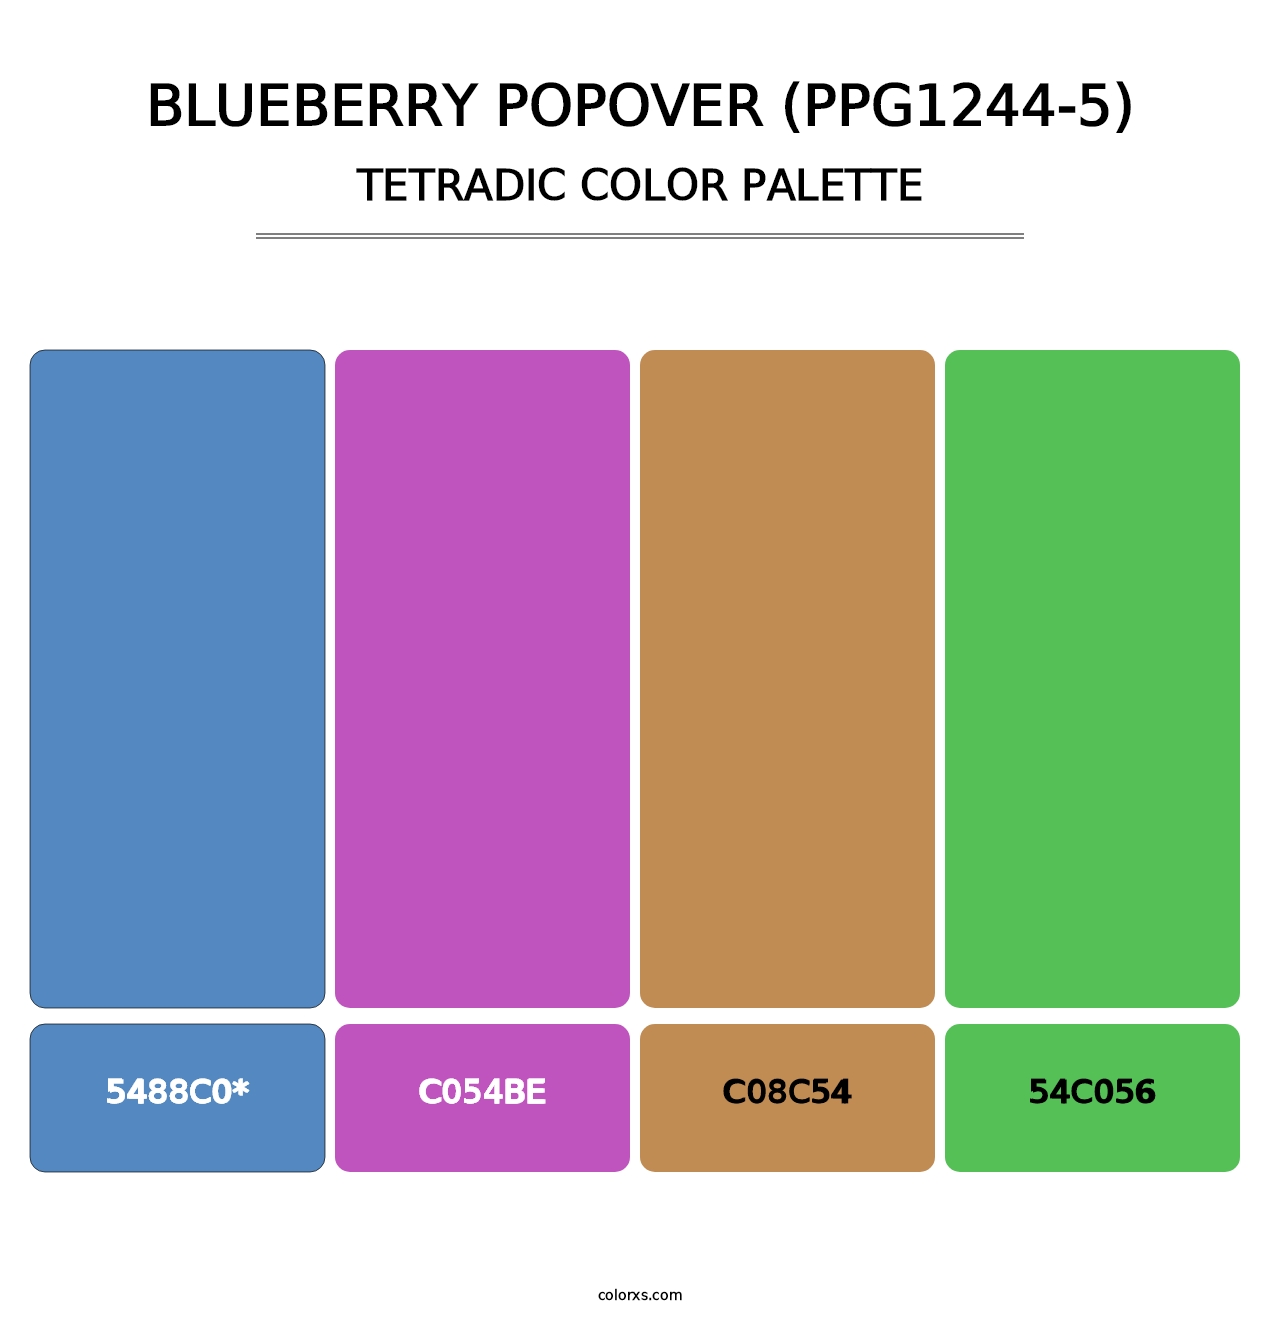 Blueberry Popover (PPG1244-5) - Tetradic Color Palette